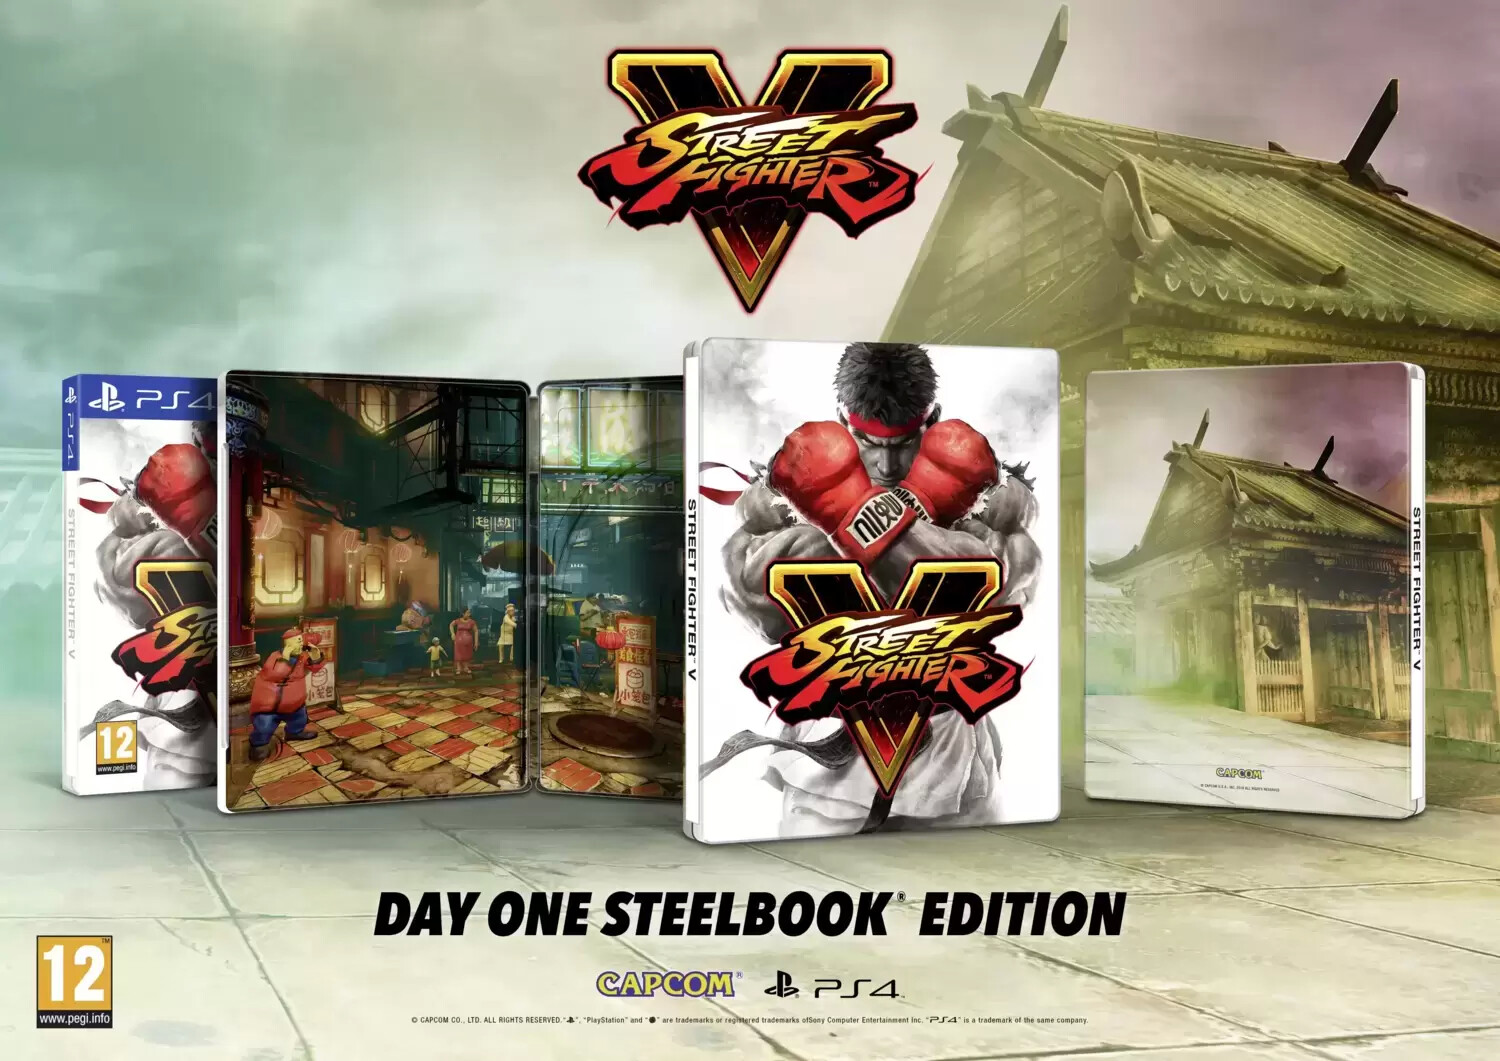 Jeux PS4 - Street fighter V Day one Steelbook Edition